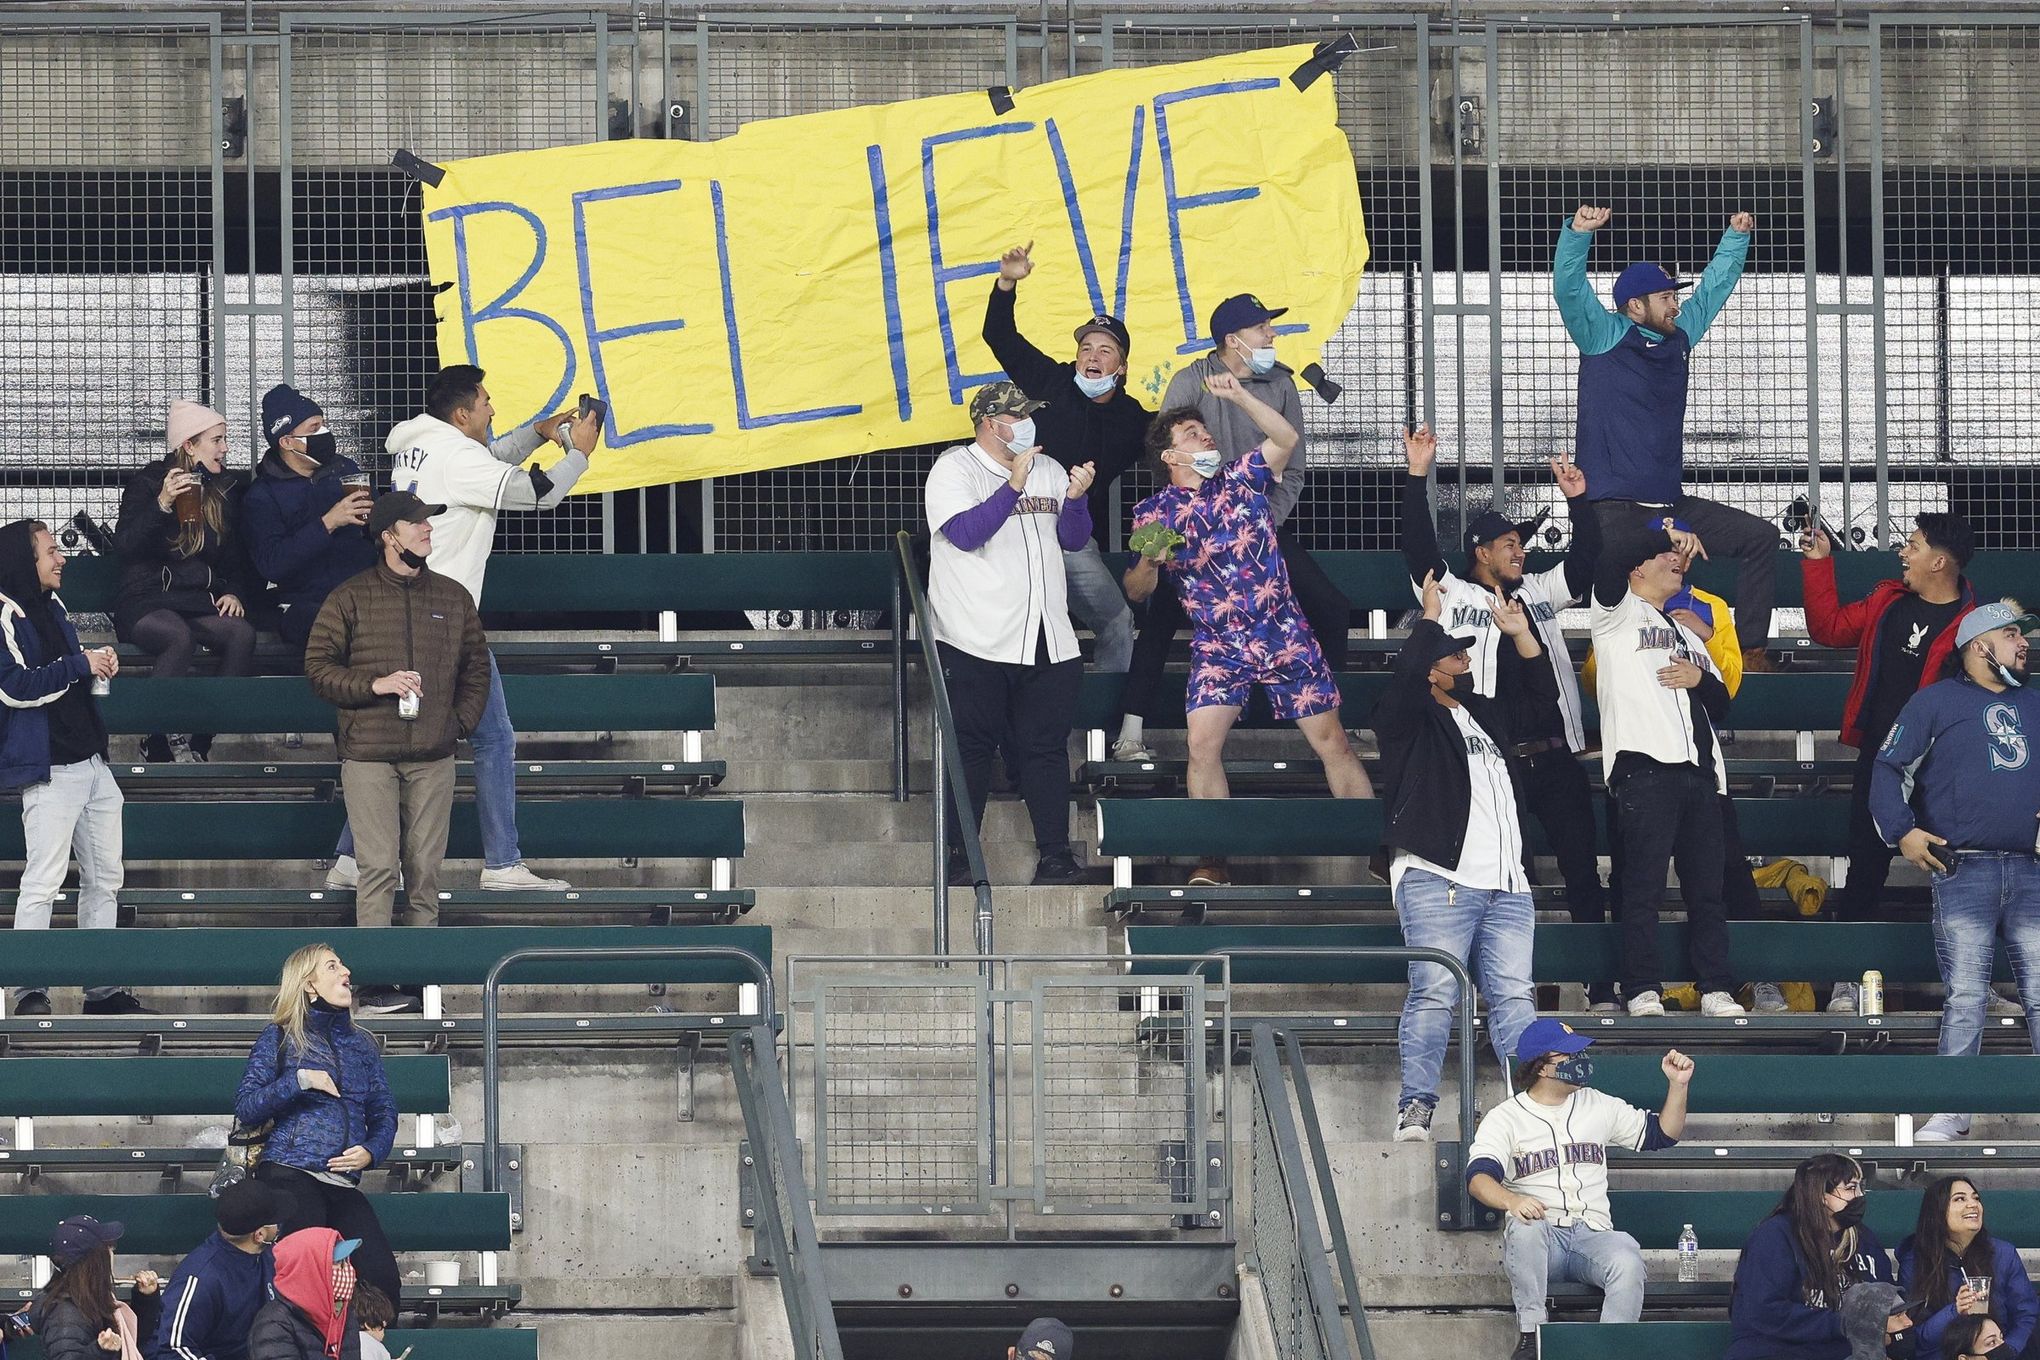 Stop everything, Seattle! The Mariners need you focused on the magic